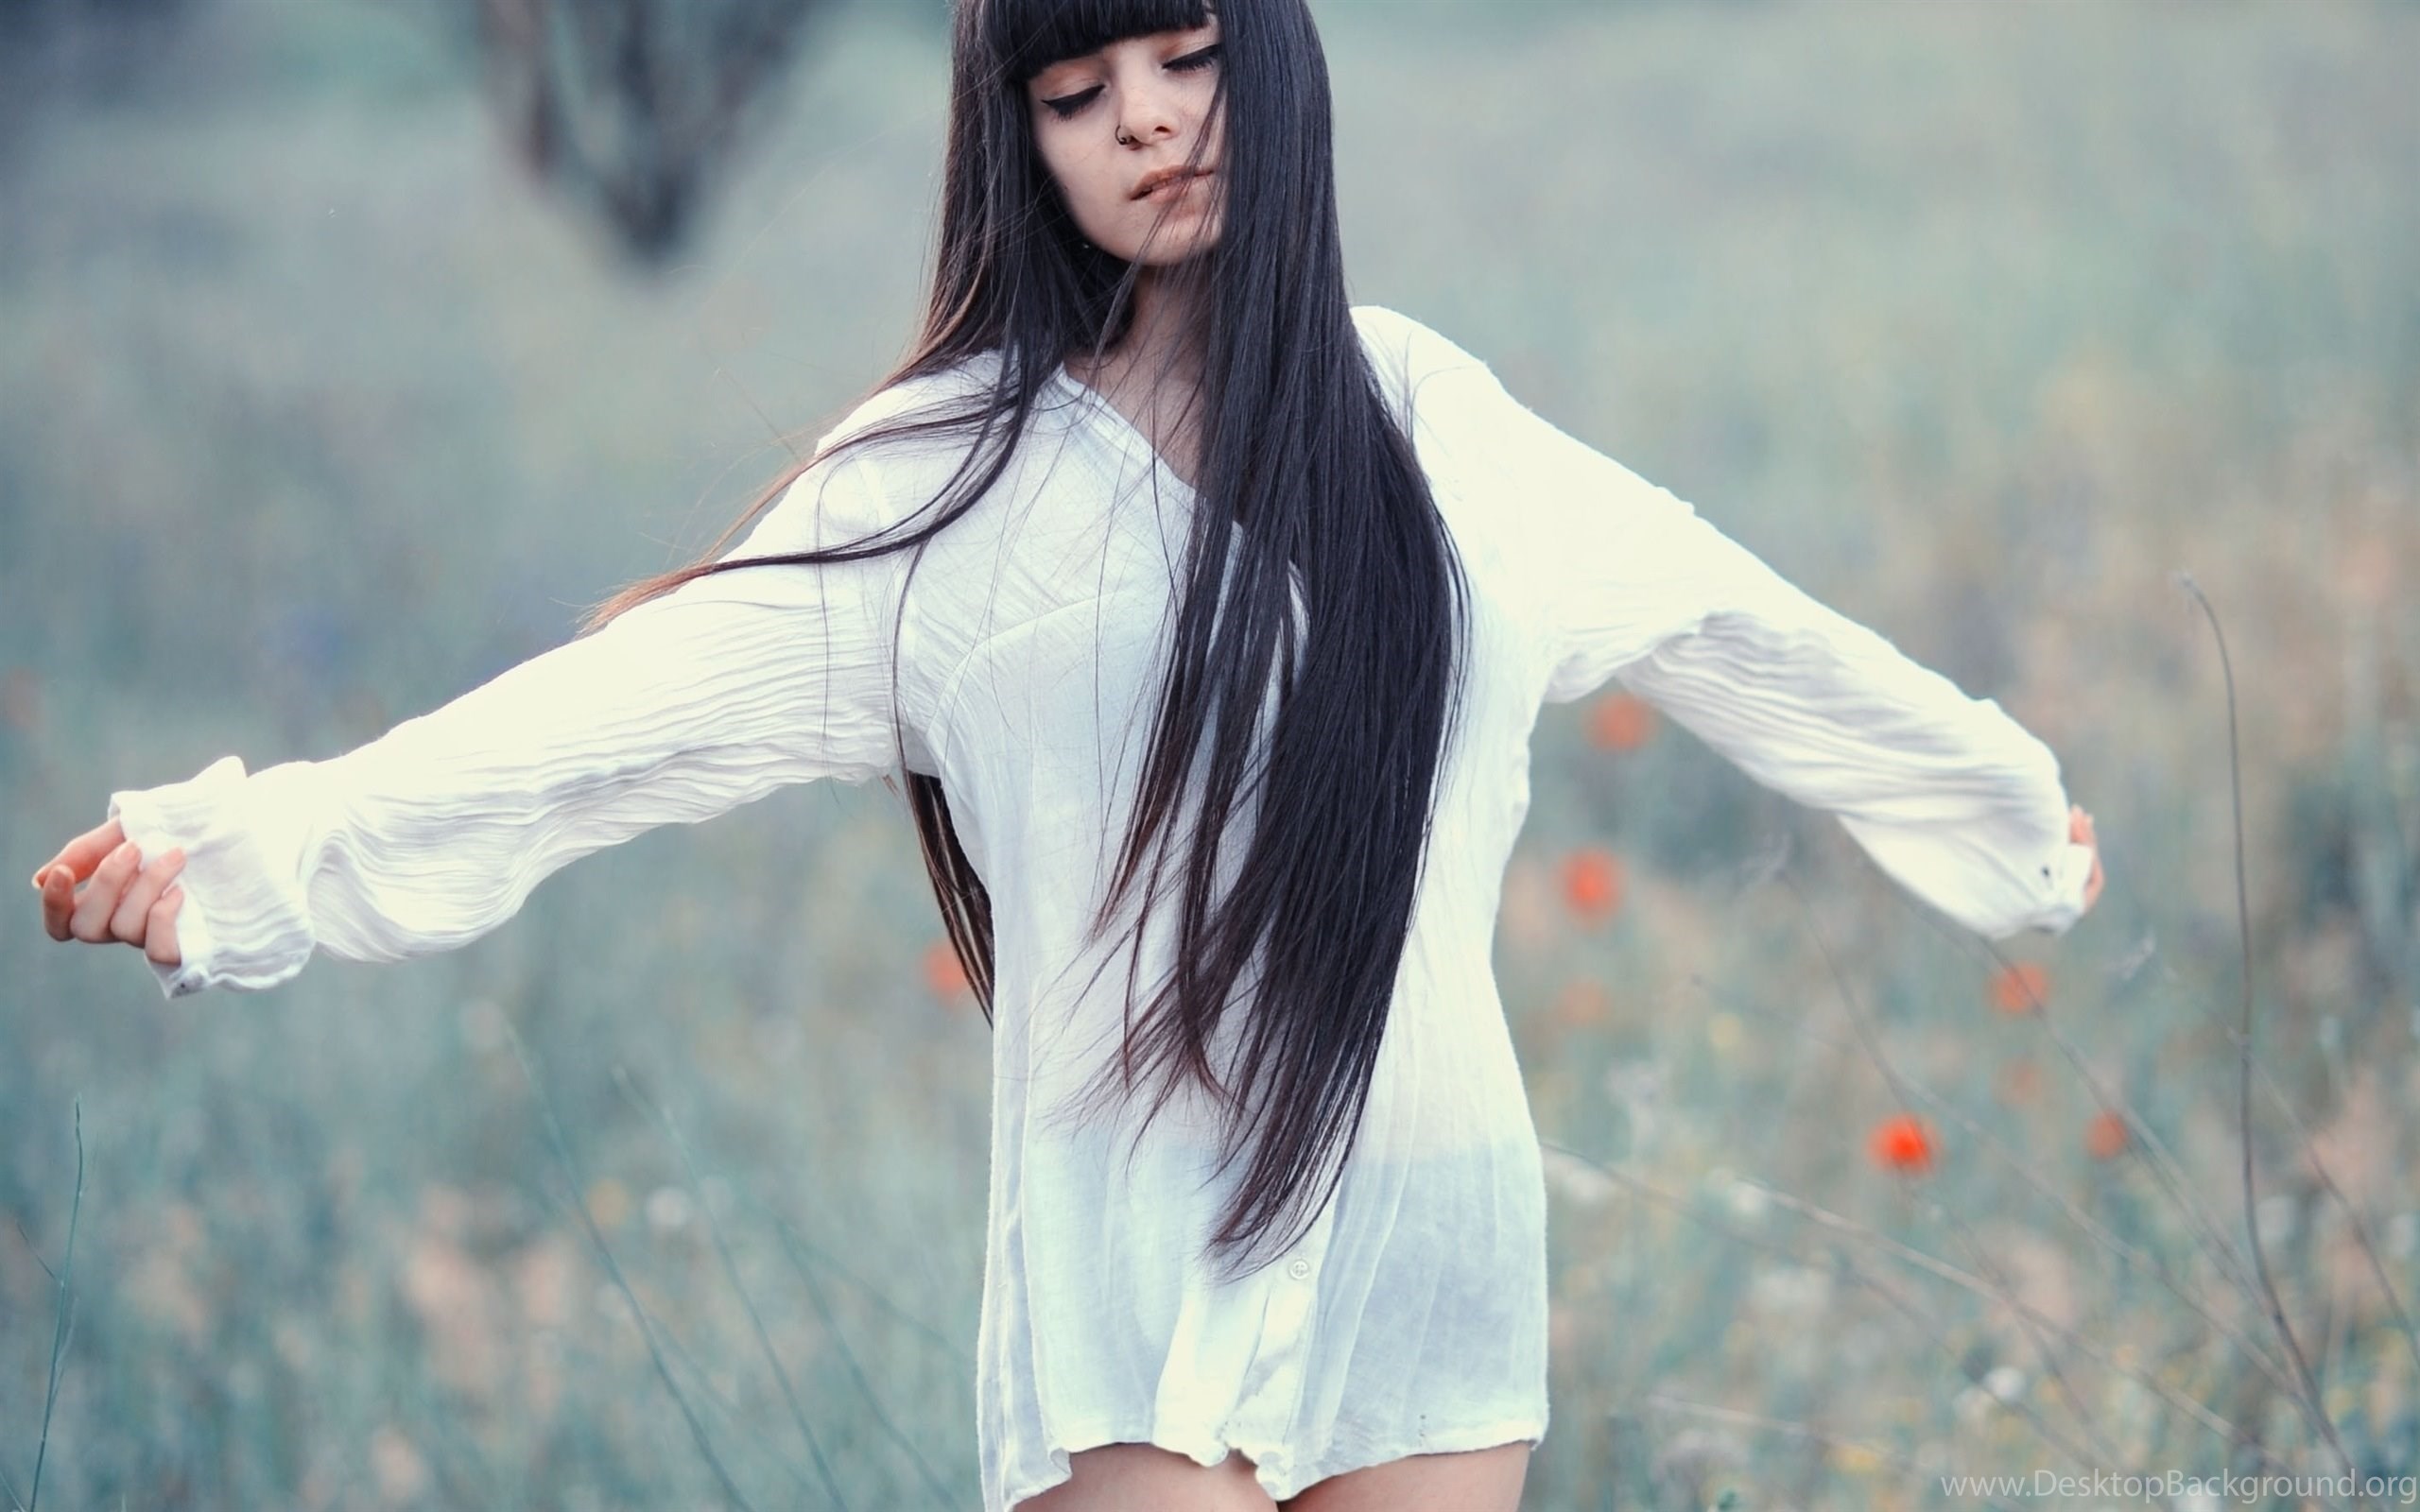 Extreme long hair and black image